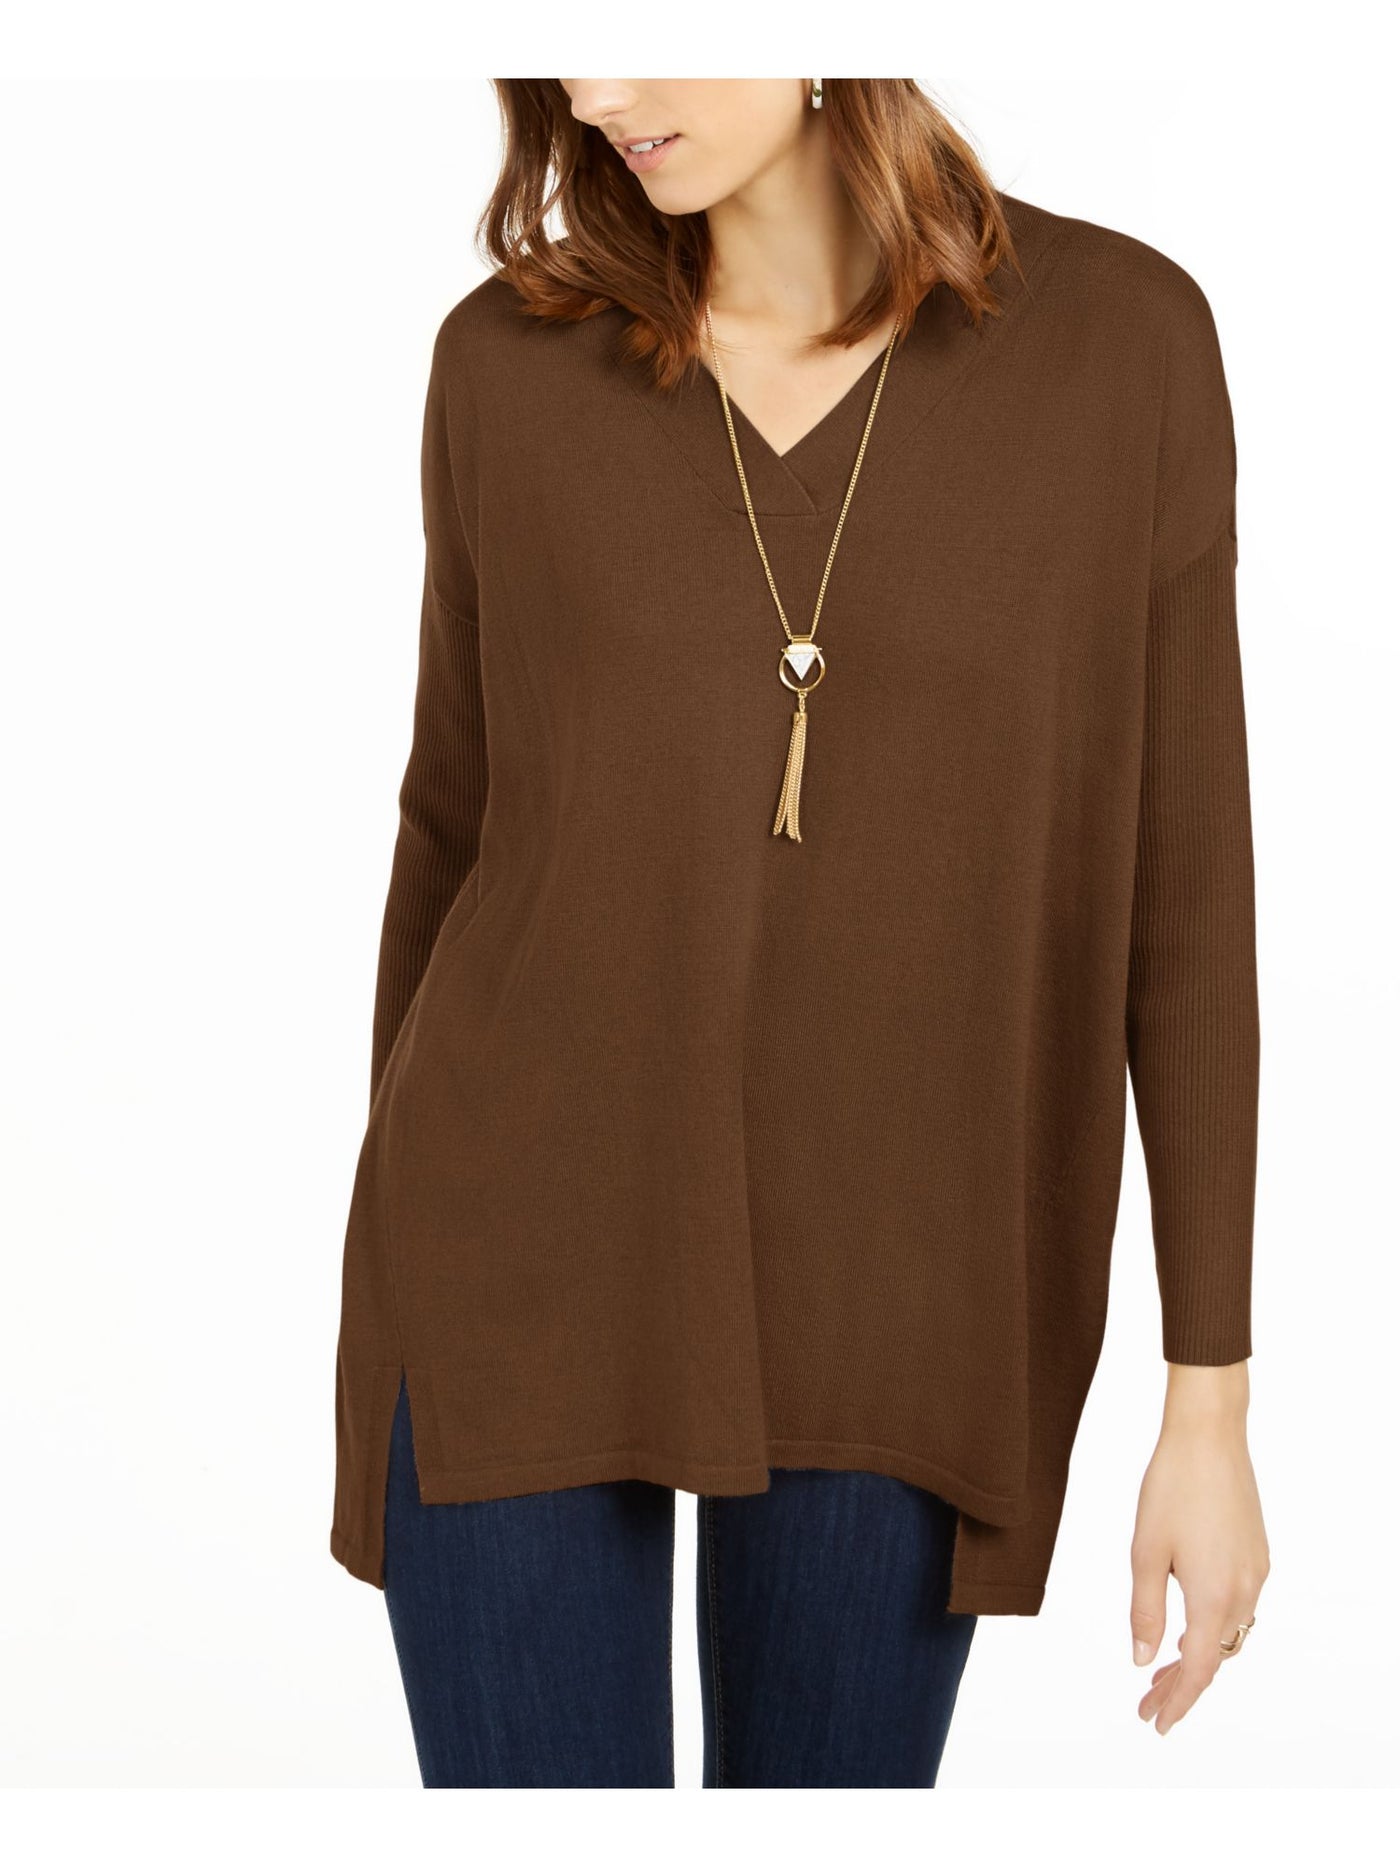 STYLE & COMPANY Womens Brown Heather Long Sleeve V Neck T-Shirt XS